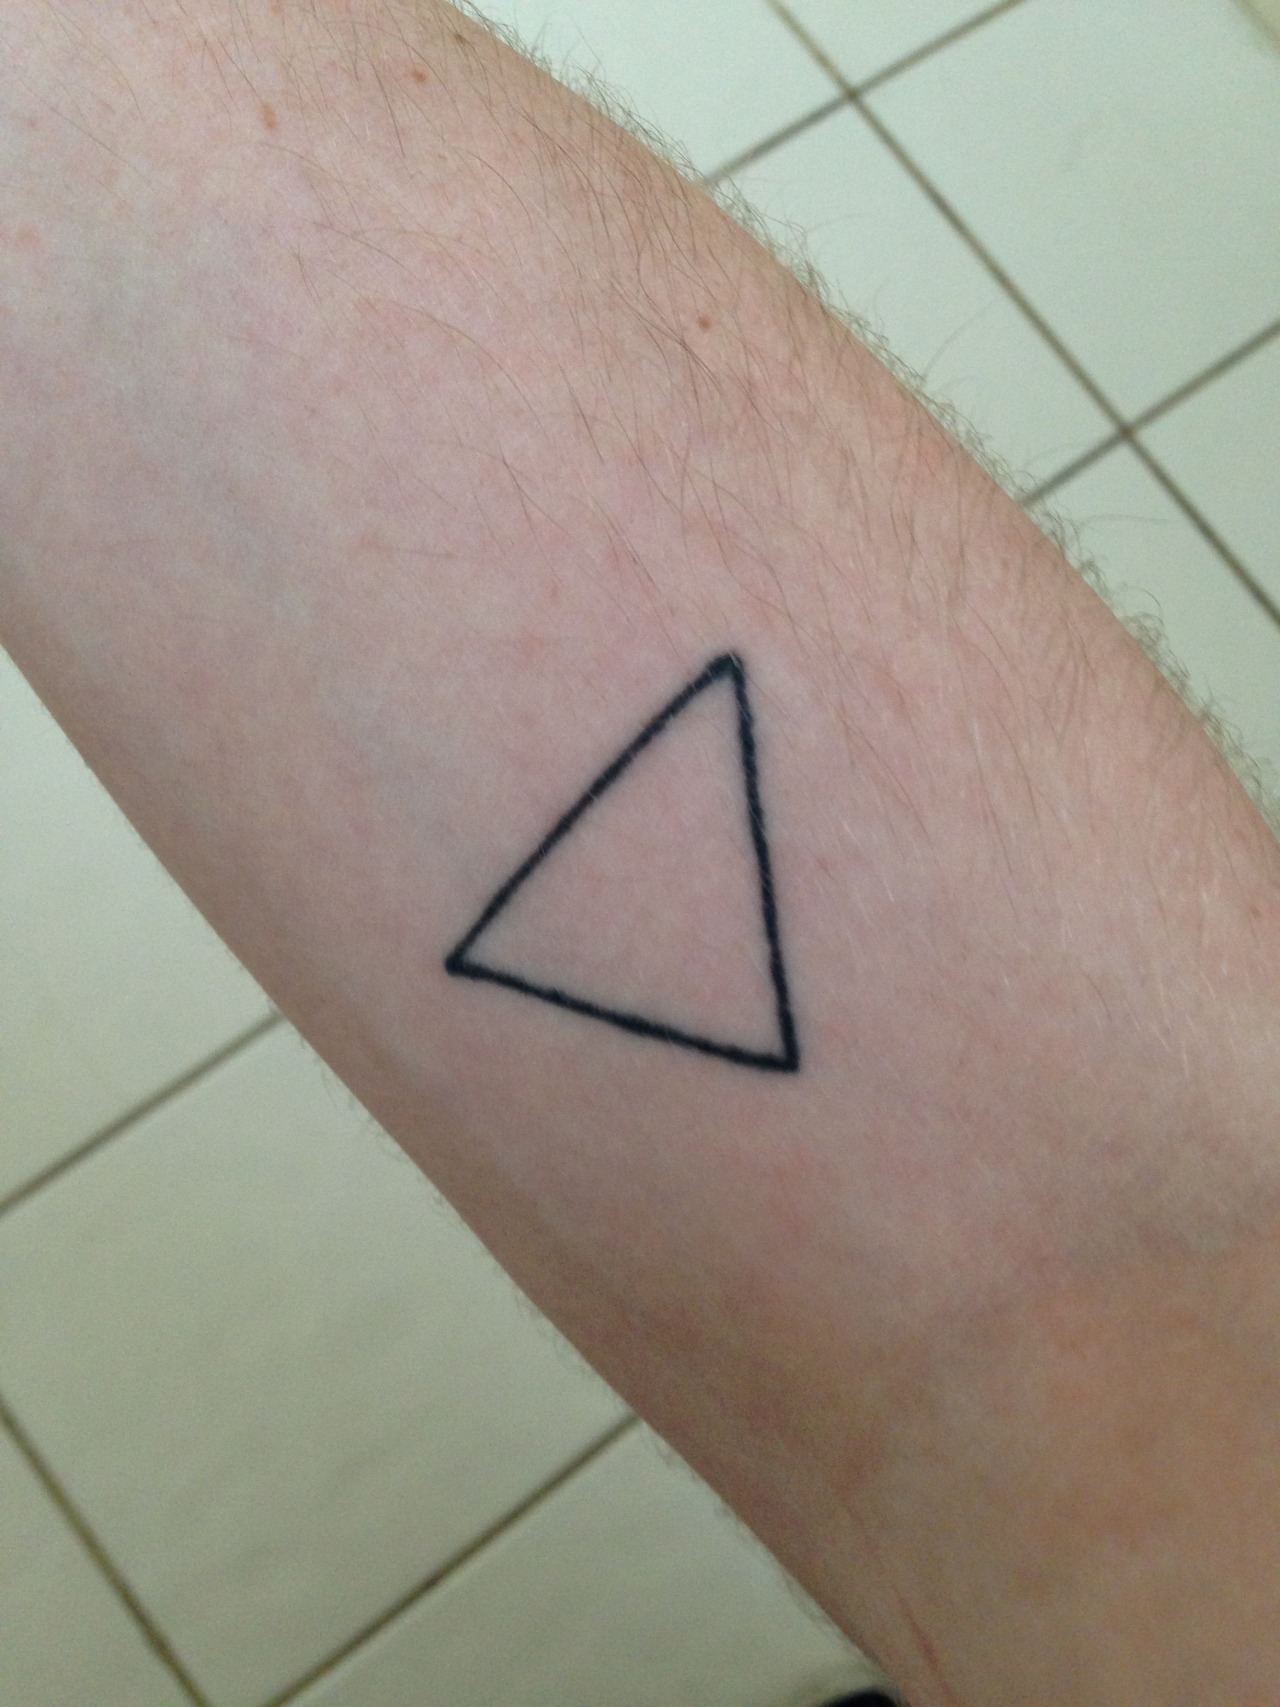 Fuck Yeah, Math and Science Tattoos! (My very first tattoo. A simple delta:  very...)